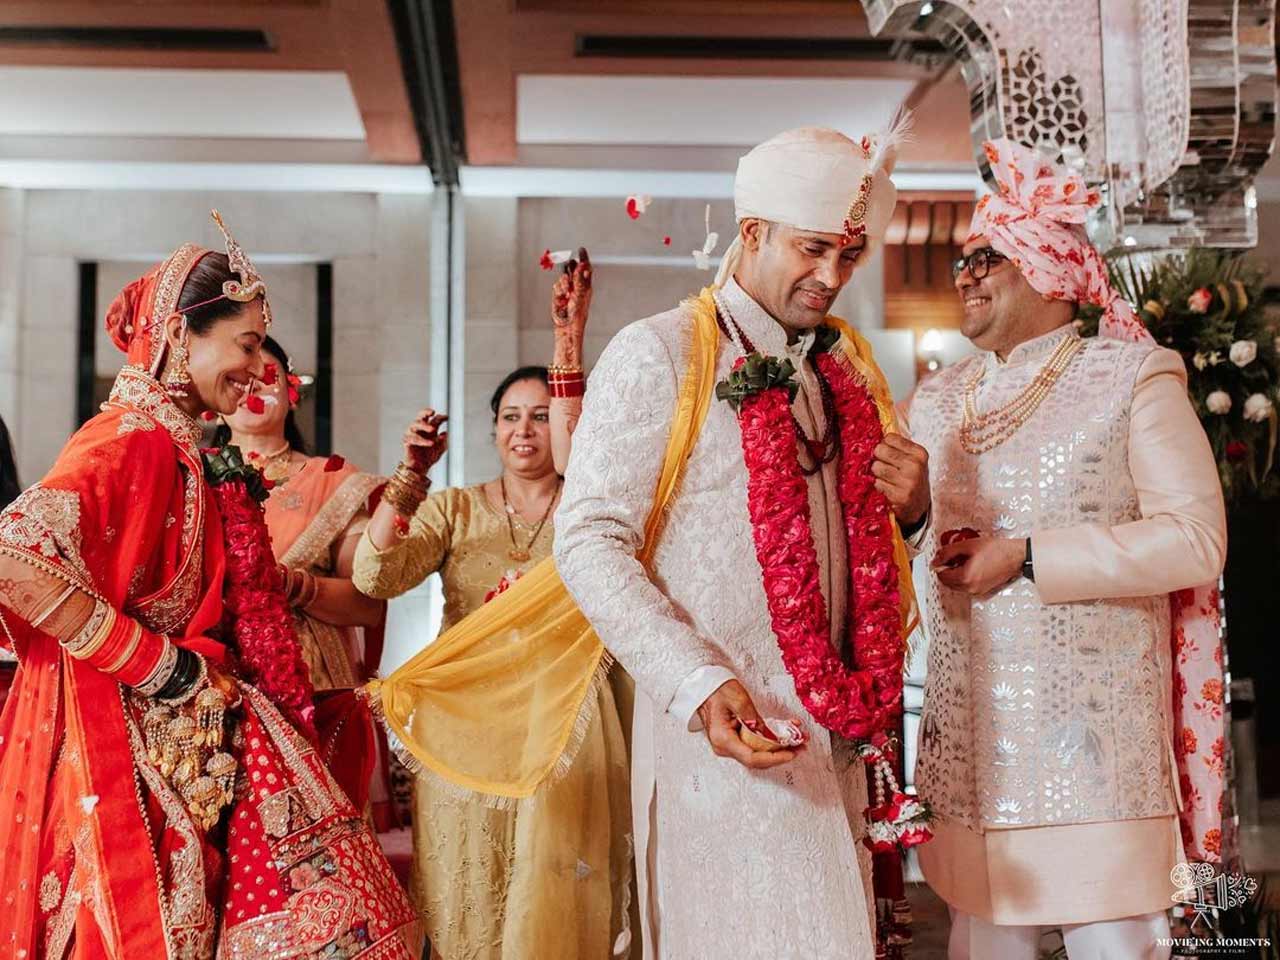 Payal and Sangram started dating in 2011 after they met on the set of a Tv reality show 'Survivor India'. In 2014, the couple got engaged in Ahmedabad and after waiting for eight years the couple finally got married